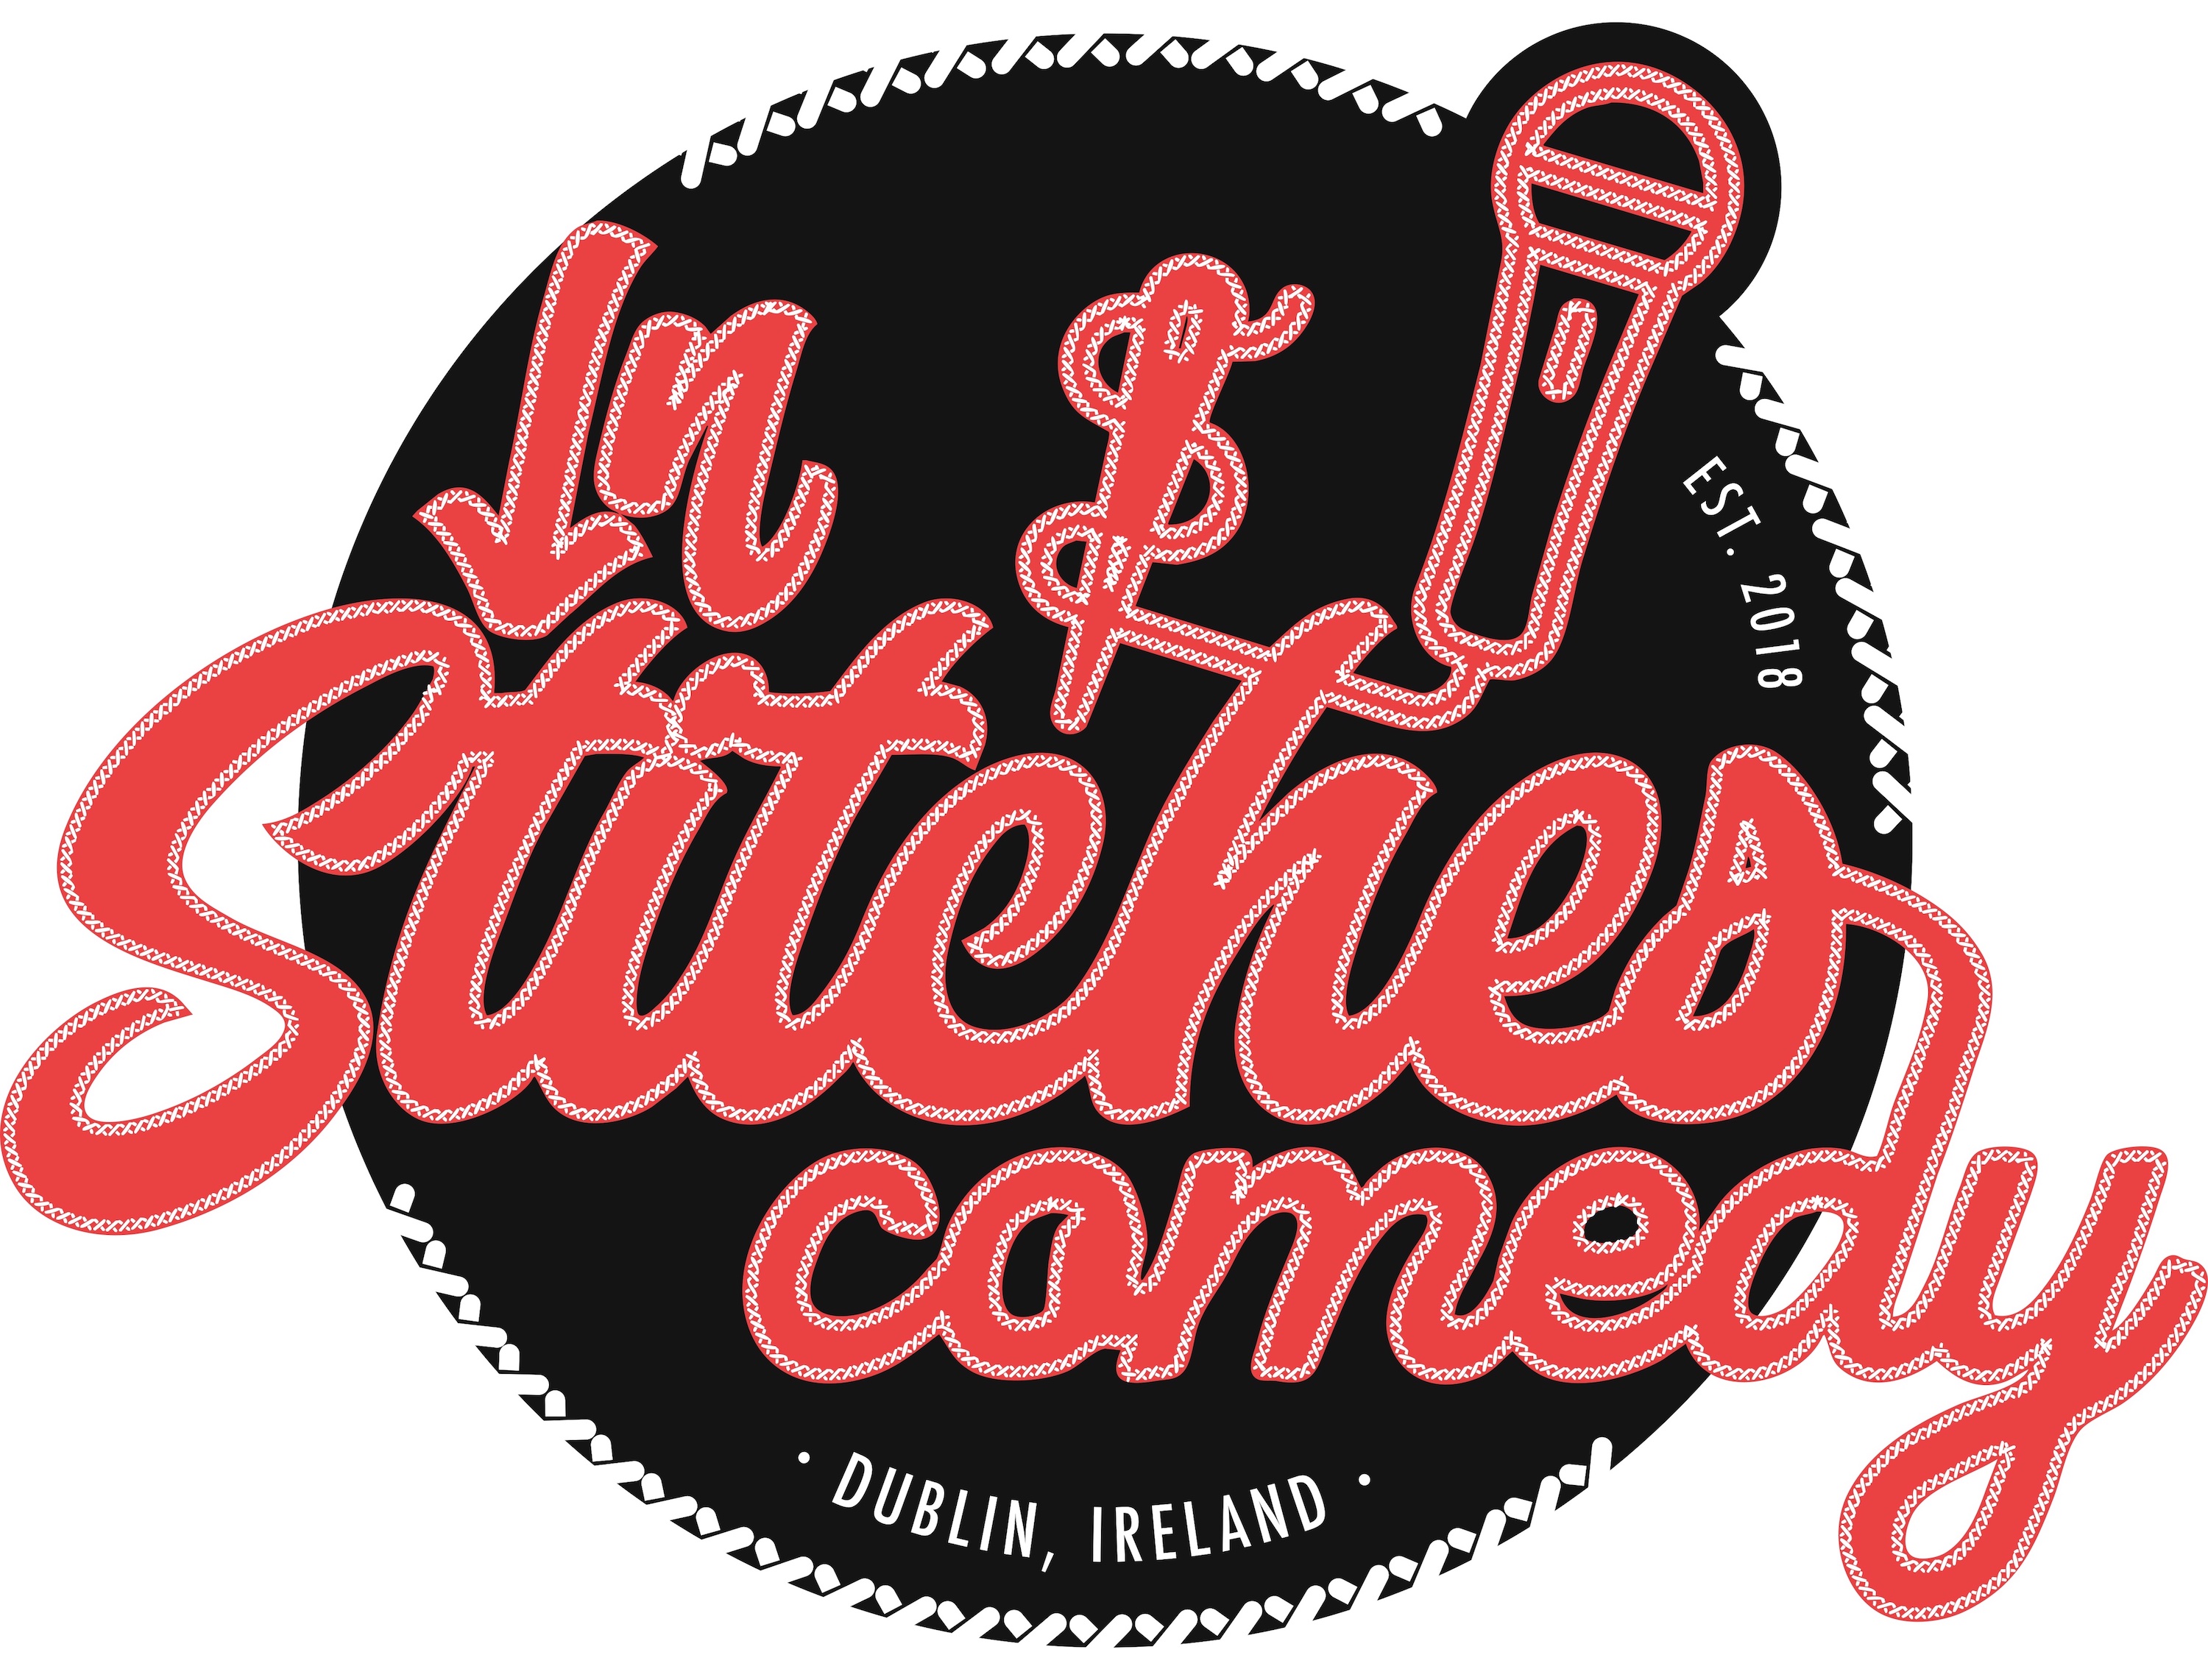 The logo of In Stitches Comedy Club Dublin. Red Black